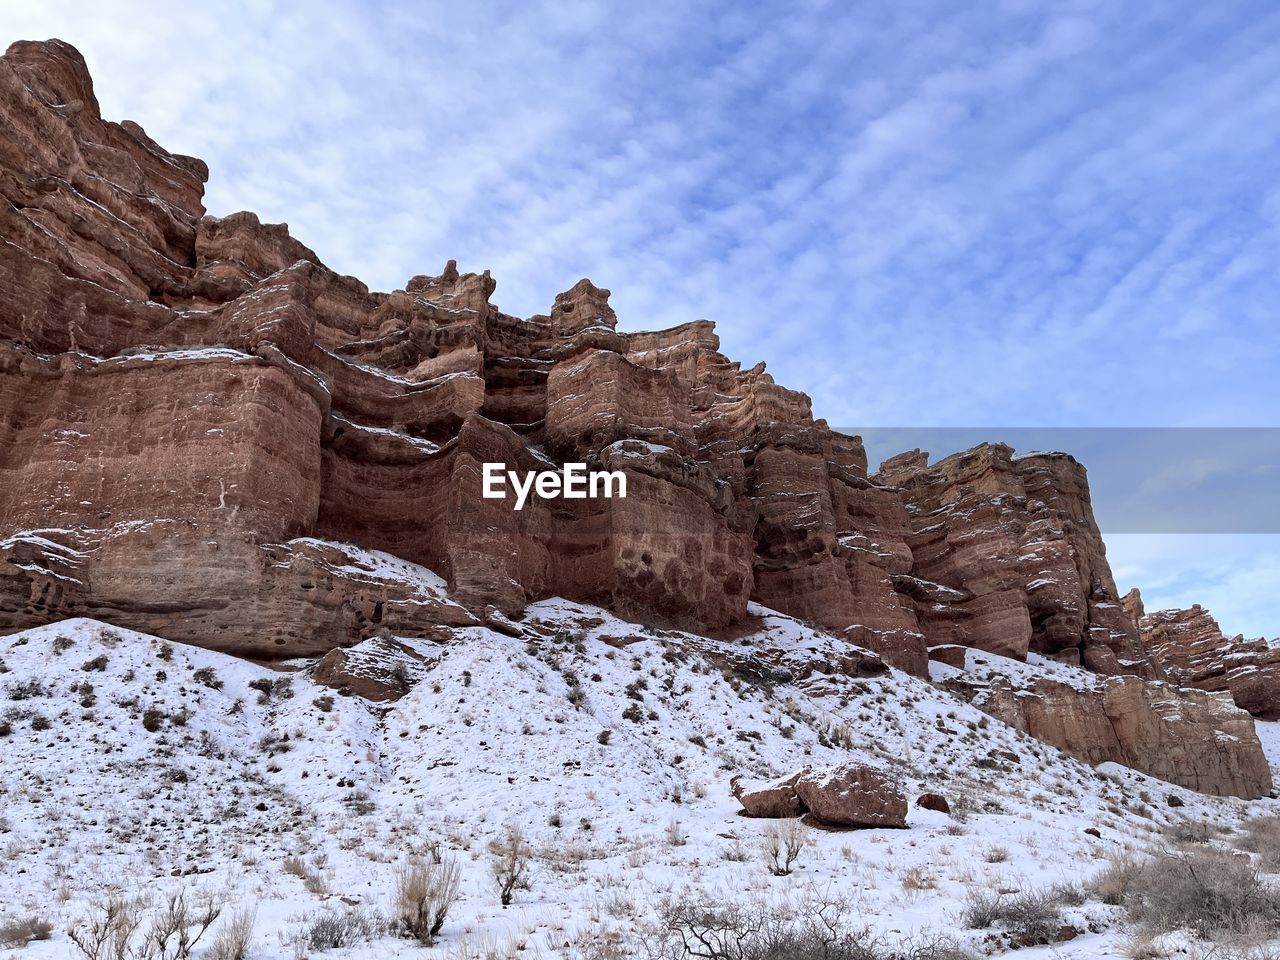 rock, rock formation, scenics - nature, sky, landscape, nature, environment, beauty in nature, travel destinations, mountain, valley, travel, non-urban scene, land, no people, cloud, tranquility, geology, snow, tranquil scene, plateau, outdoors, wilderness, desert, day, eroded, extreme terrain, winter, formation, cold temperature, wadi, tourism, arch, blue, physical geography, remote, terrain, natural environment, mountain range